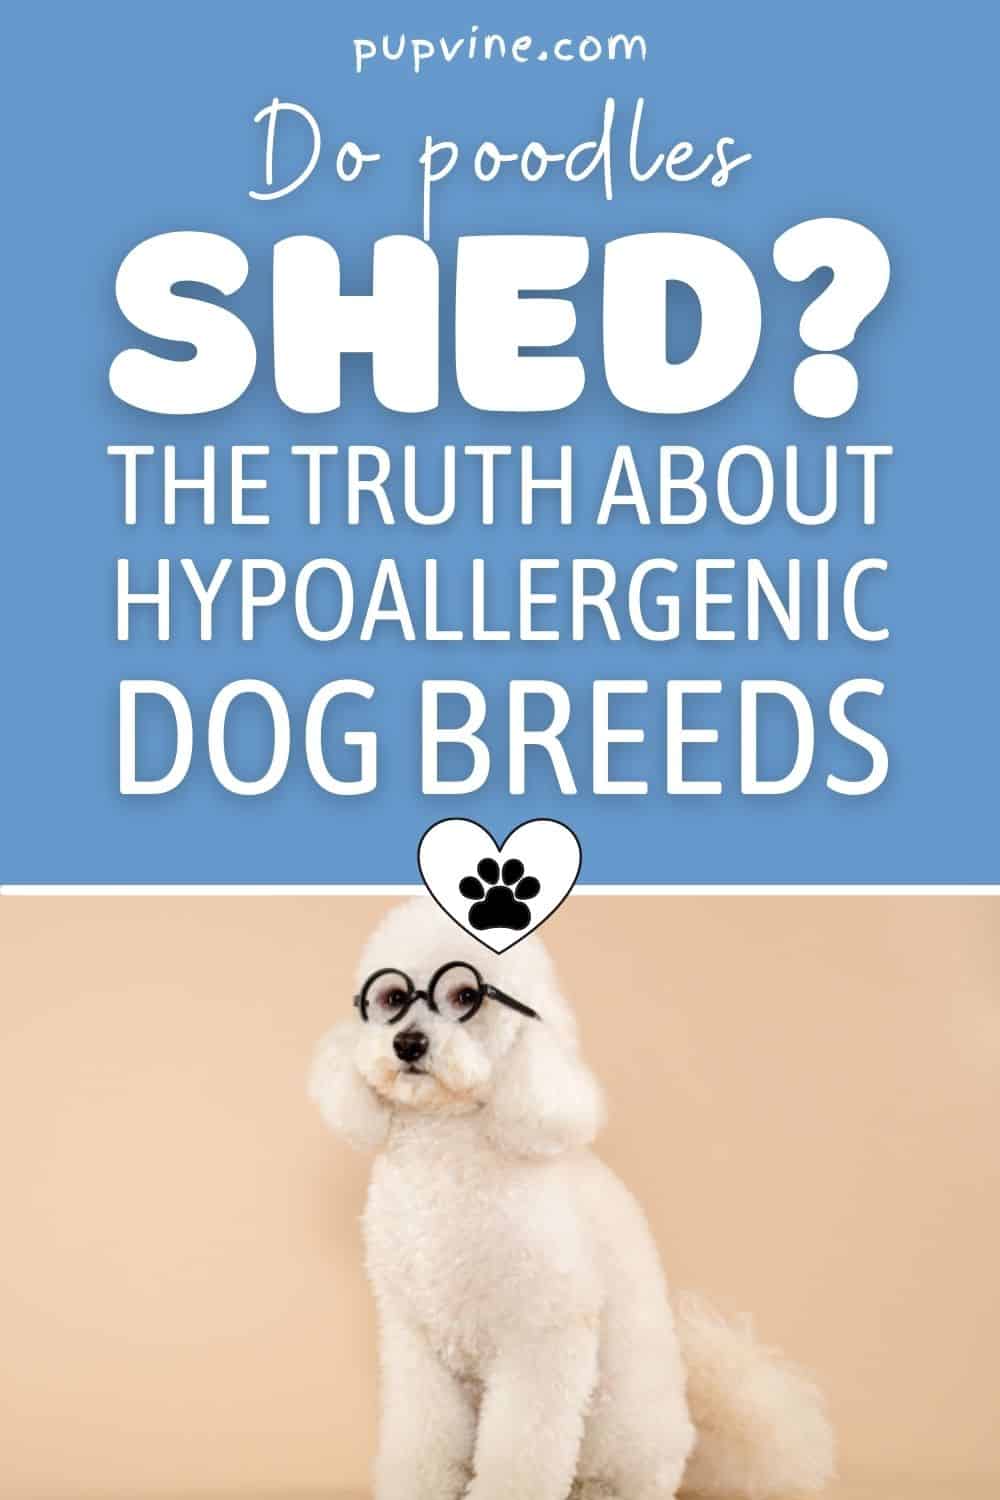 Do Poodles Shed? The Truth About Hypoallergenic Dog Breeds